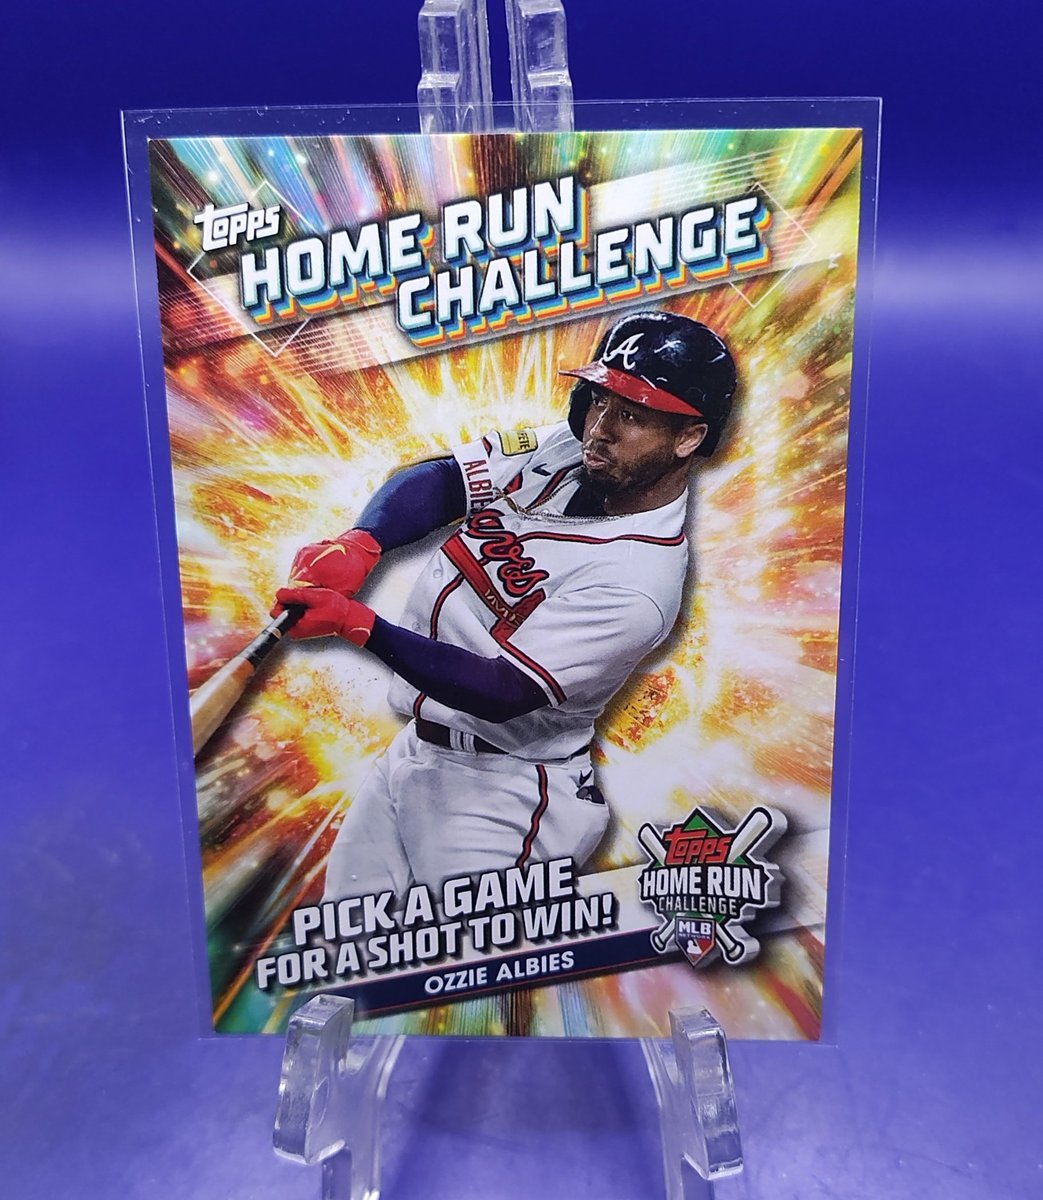 Ozzie Albies 
Home Run Challenge Card 

#WackyWednesday 
Starting bid $1.00
At least a $.25 is required after opening 

#WackyWeekFinalRound is tomorrow 
Add to your #WackyStack
Happy collecting everyone